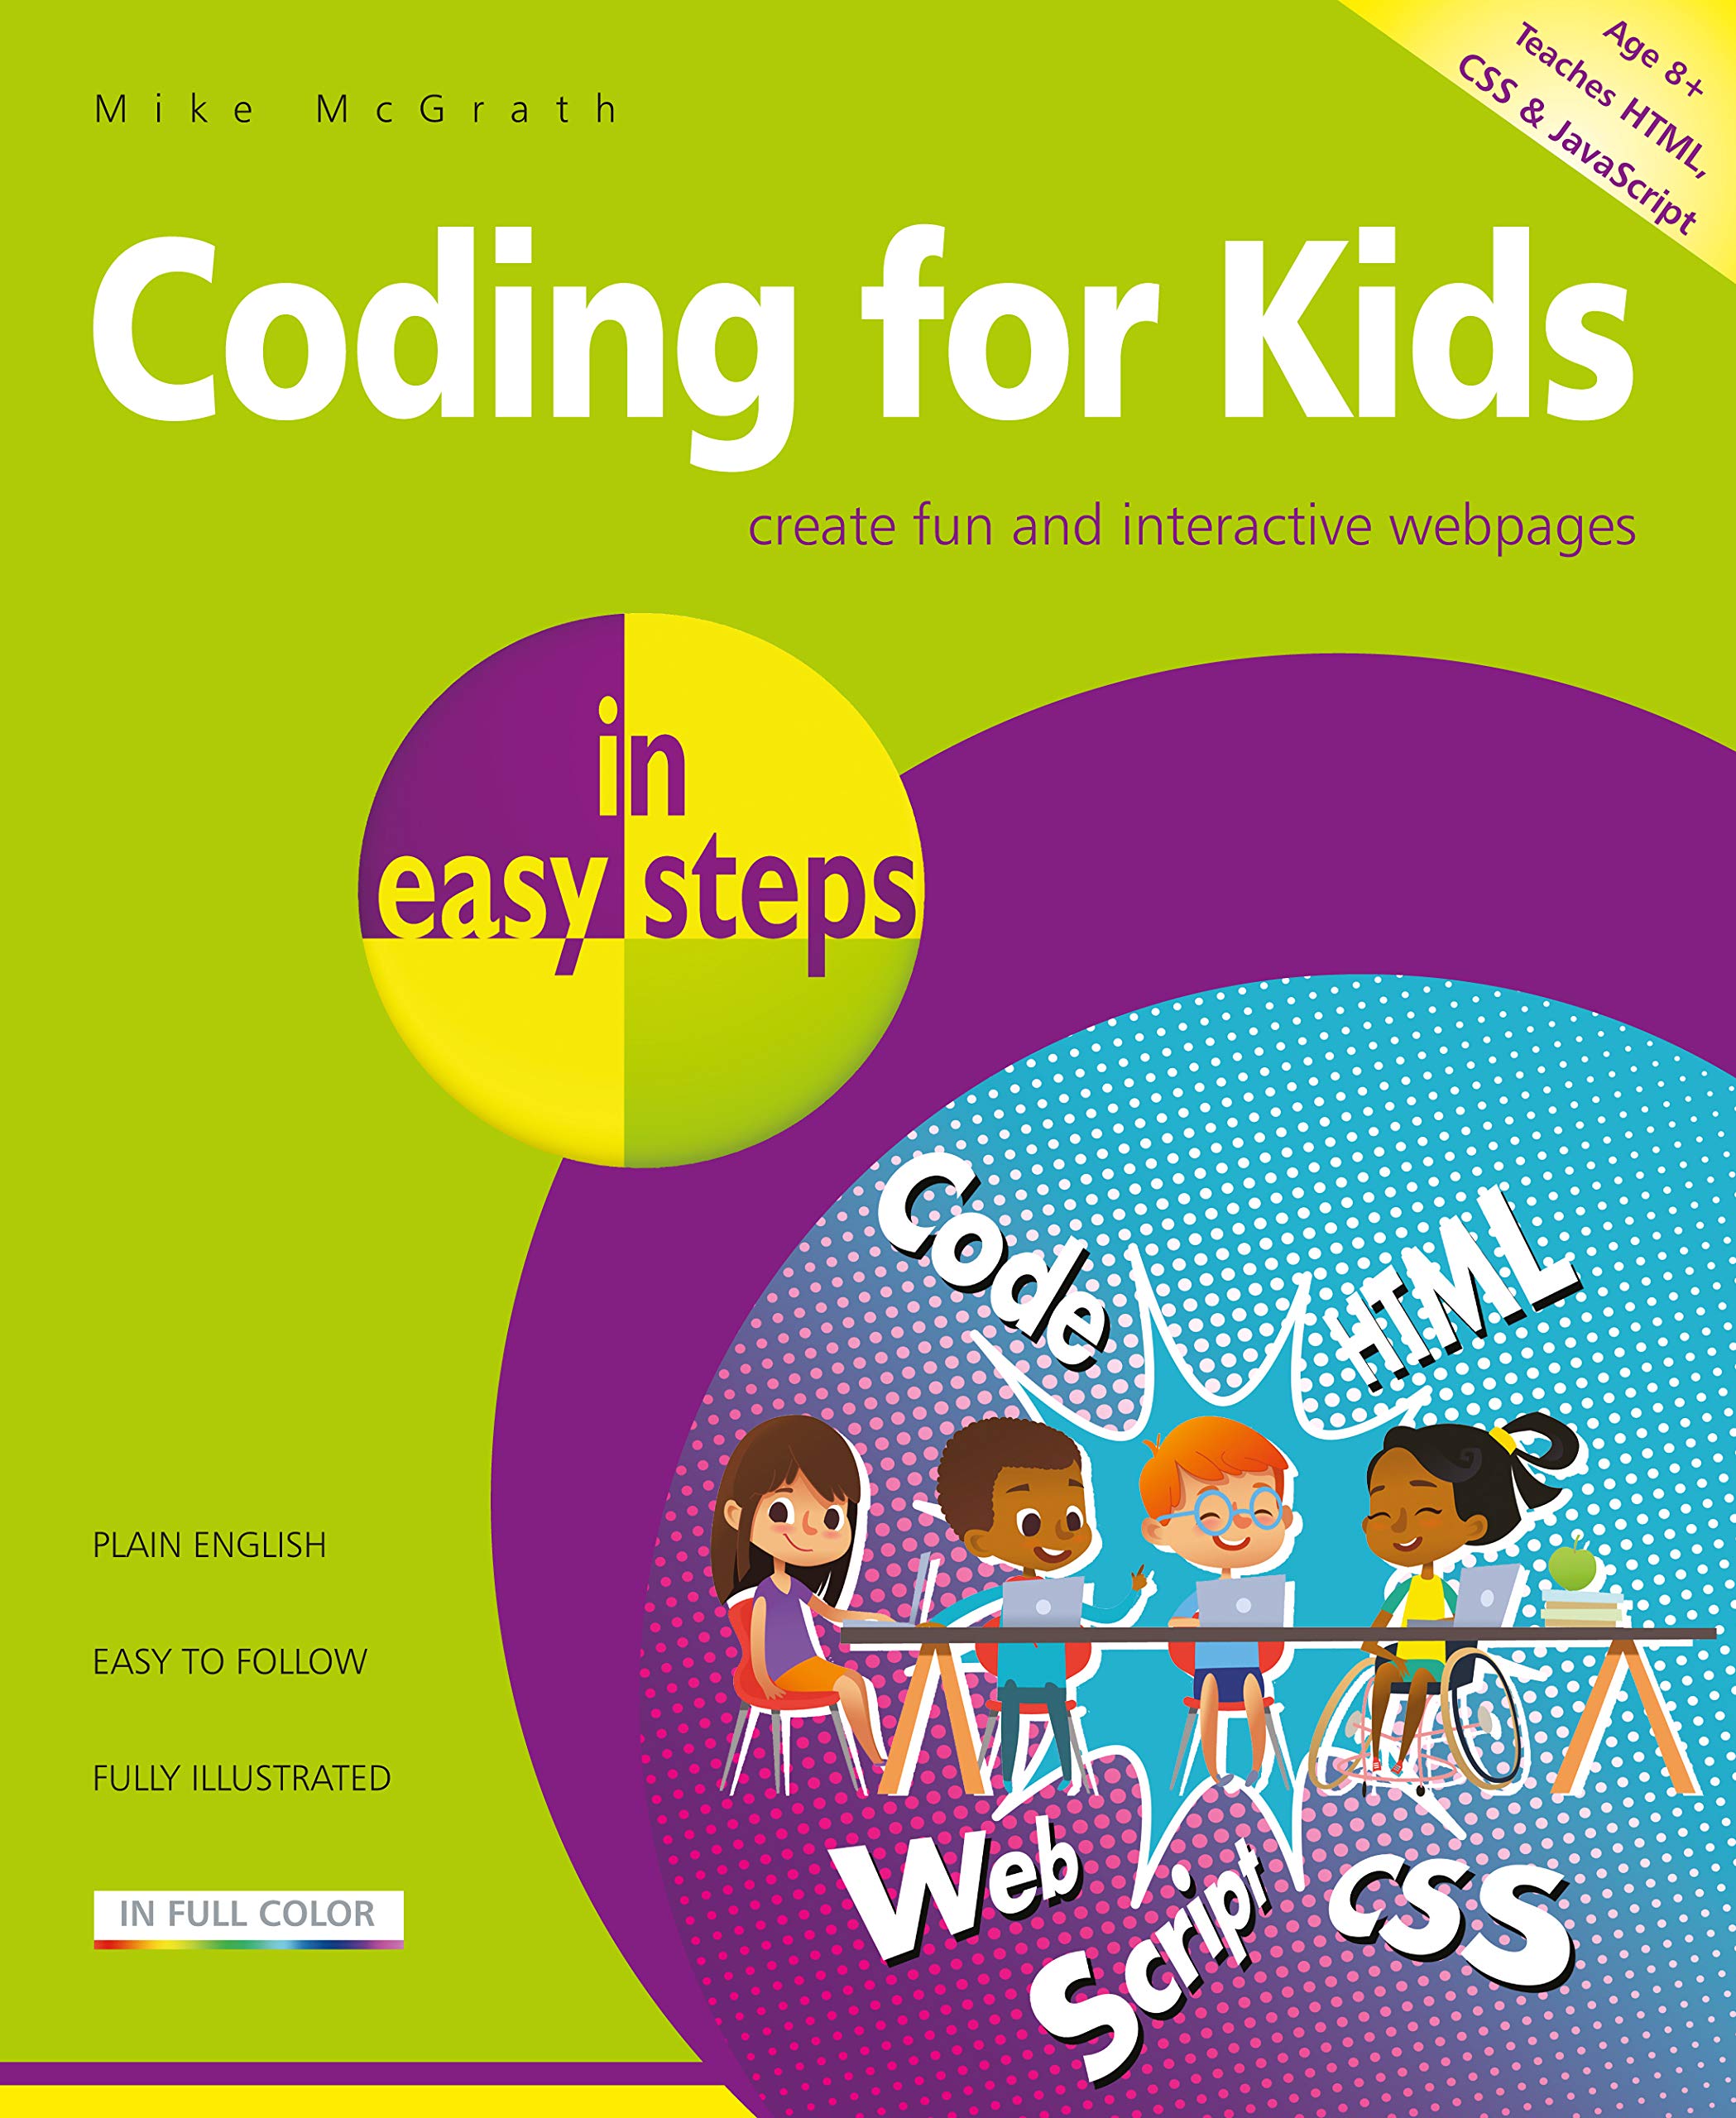 Coding for Kids in easy steps - Mike McGrath